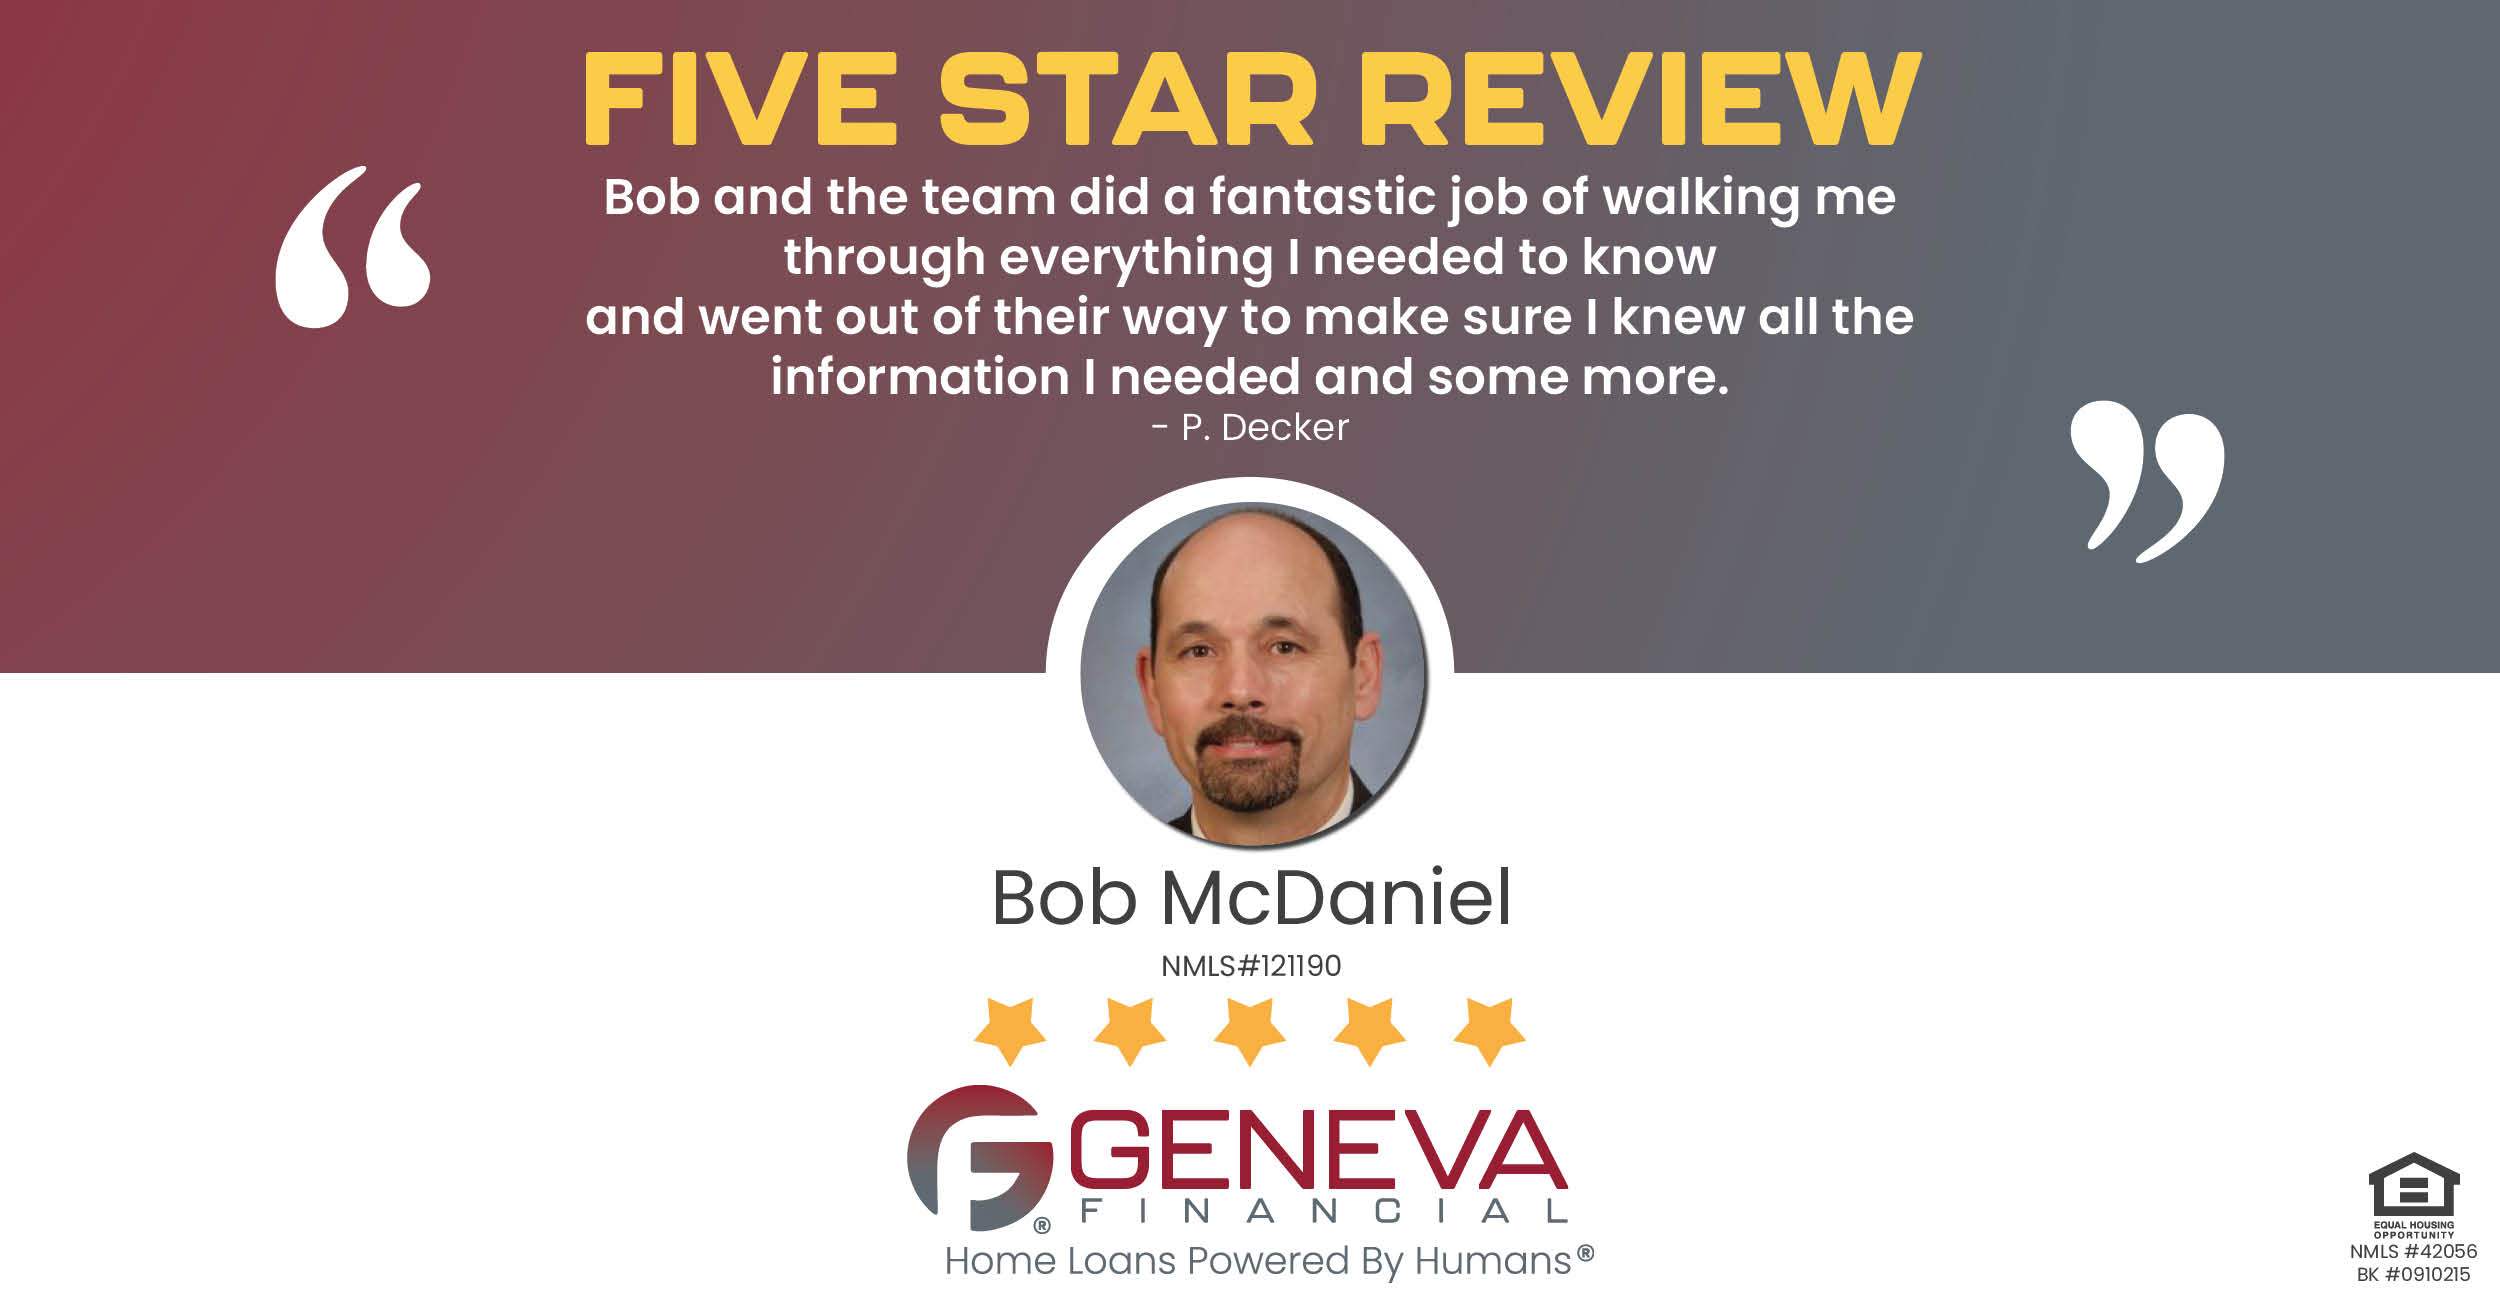 5 Star Review for Bob McDaniel, Licensed Mortgage Loan Officer with Geneva Financial, Portland, OR – Home Loans Powered by Humans®.